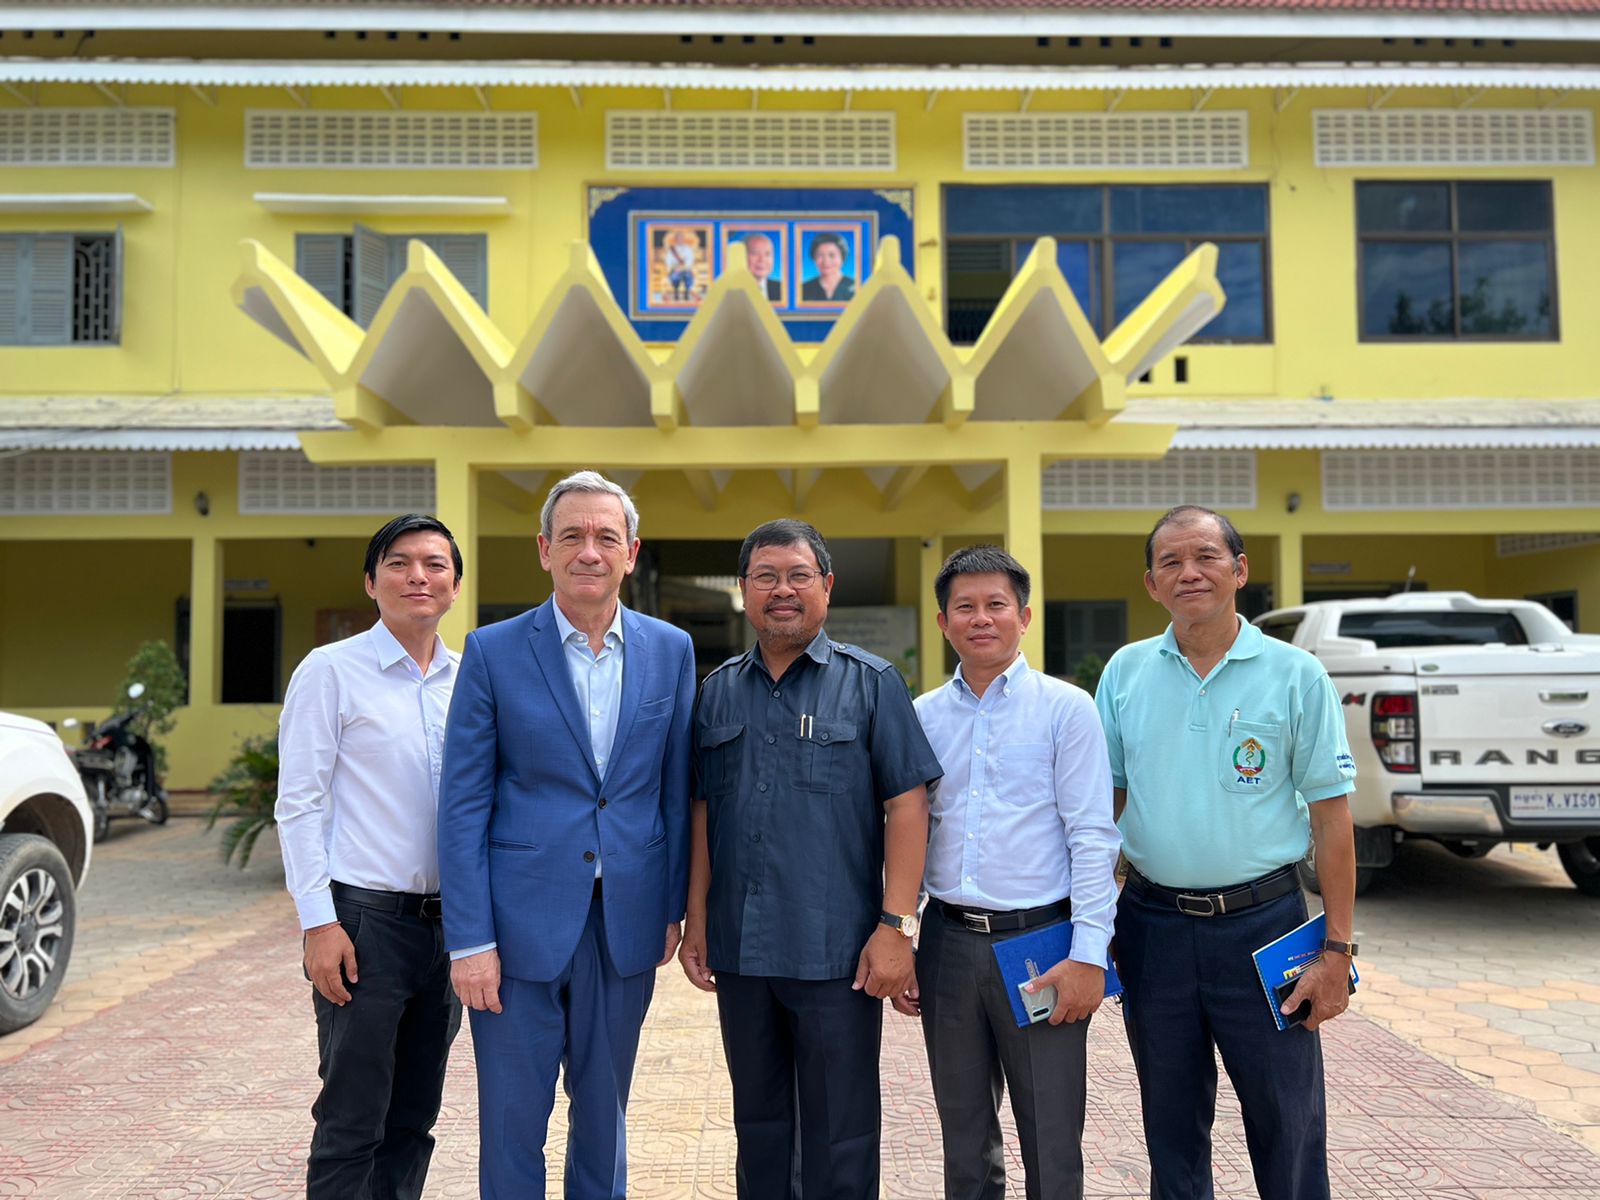 Mission to Battambang’s Rabies Prevention Center